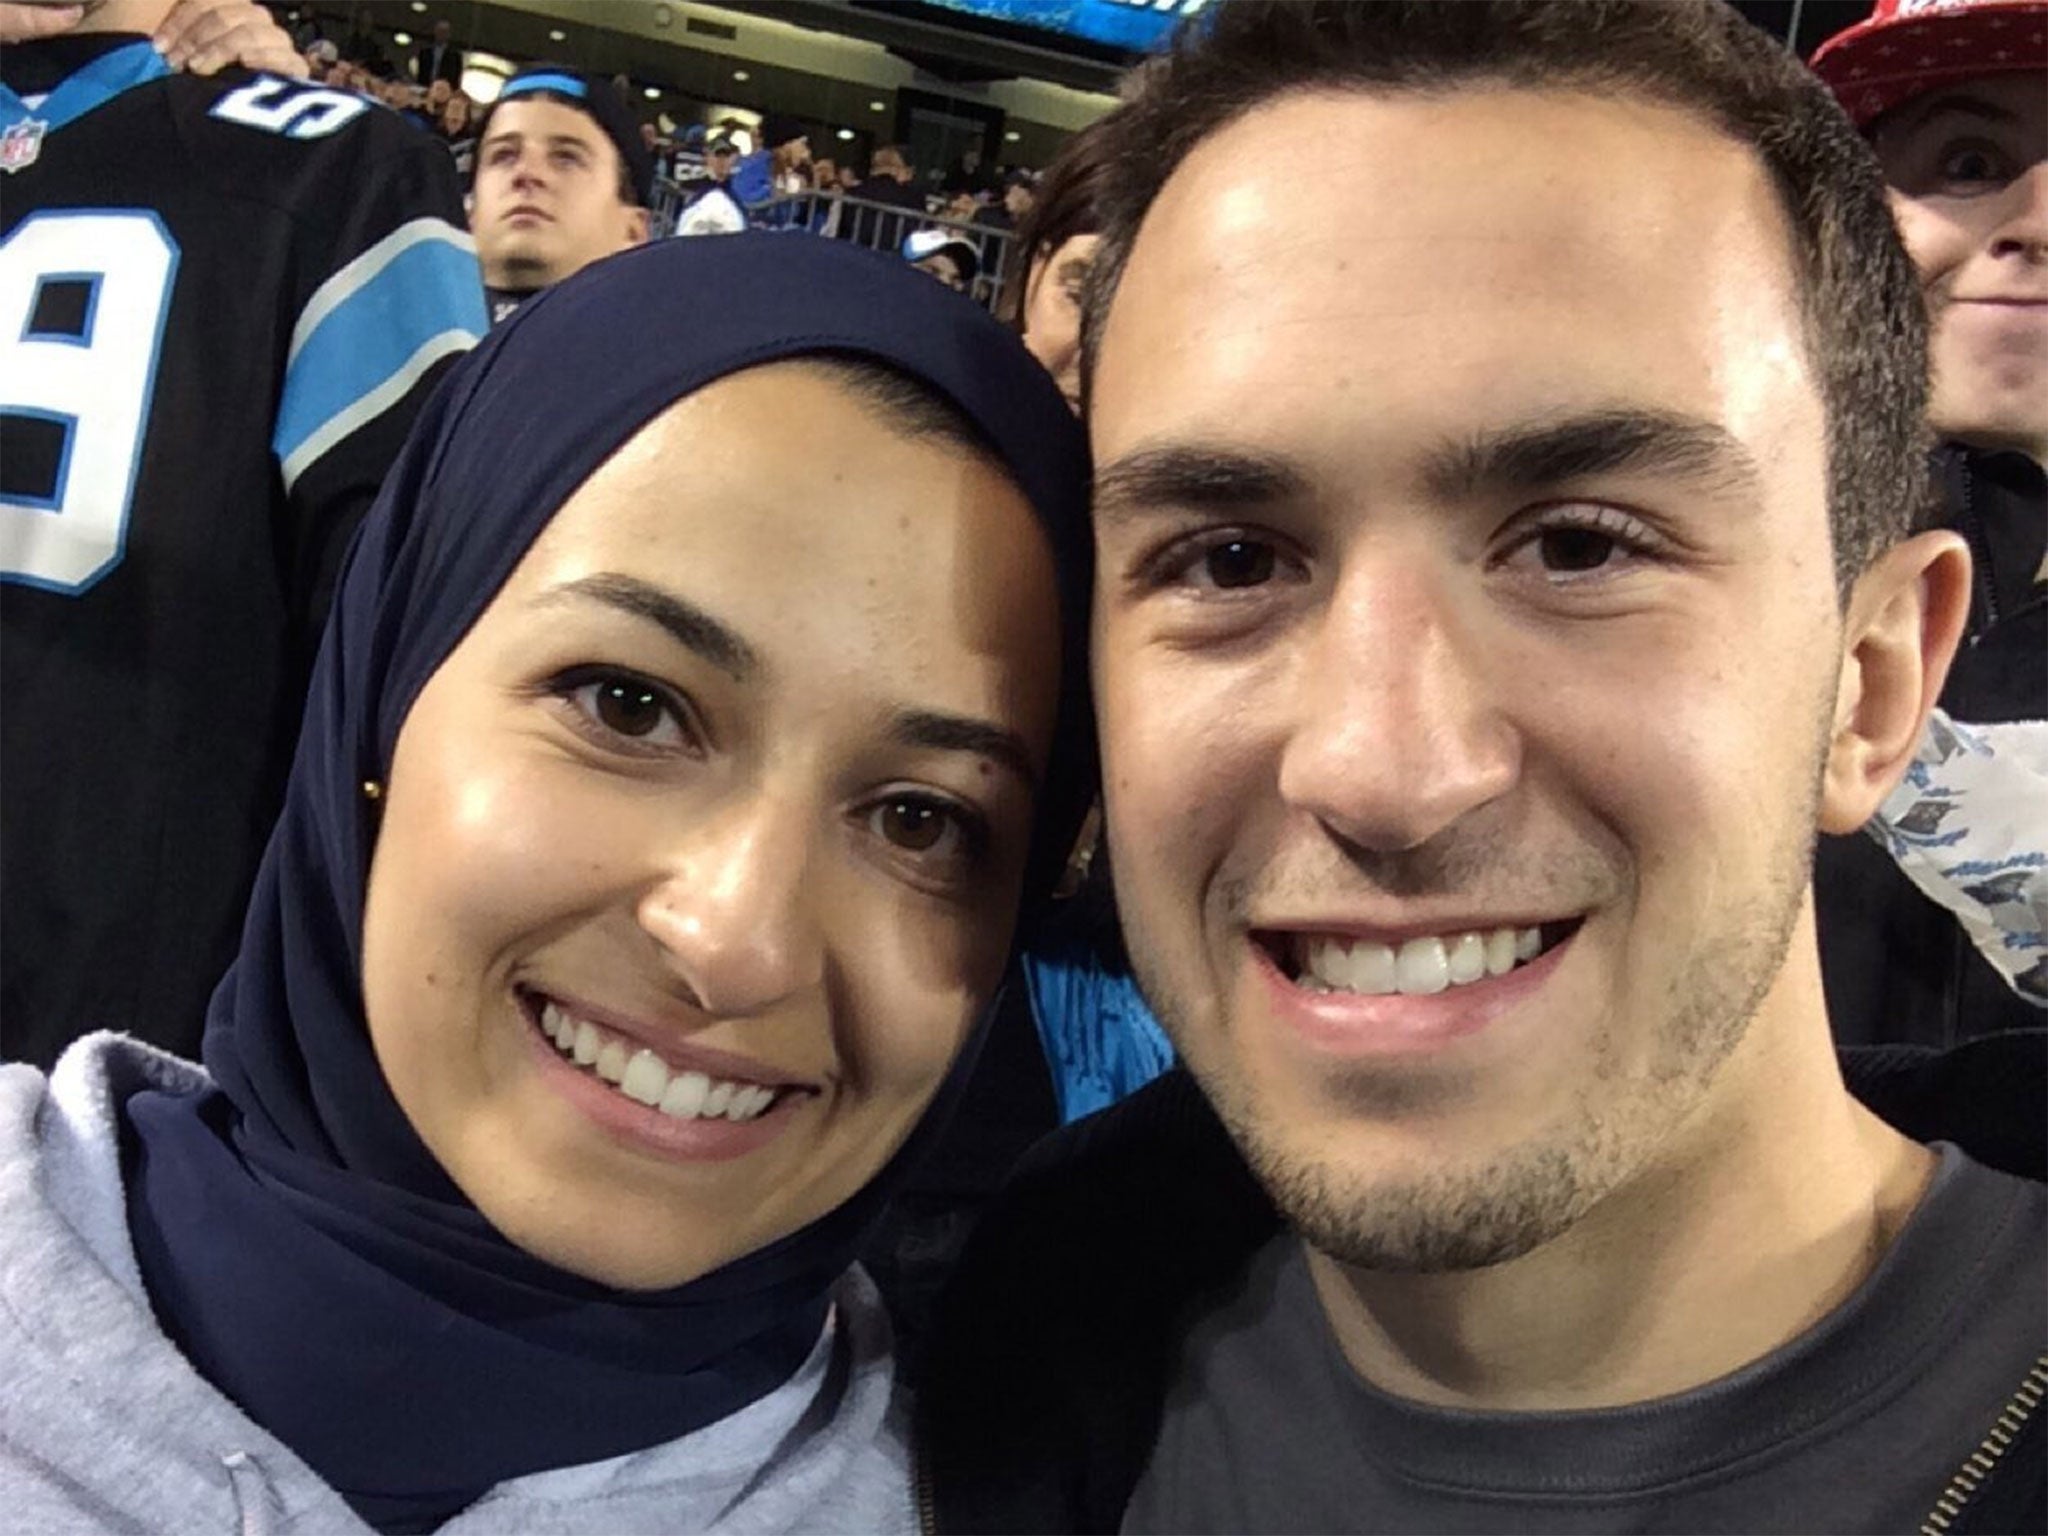 Deah Barakat and his wife Yusor at an American football match